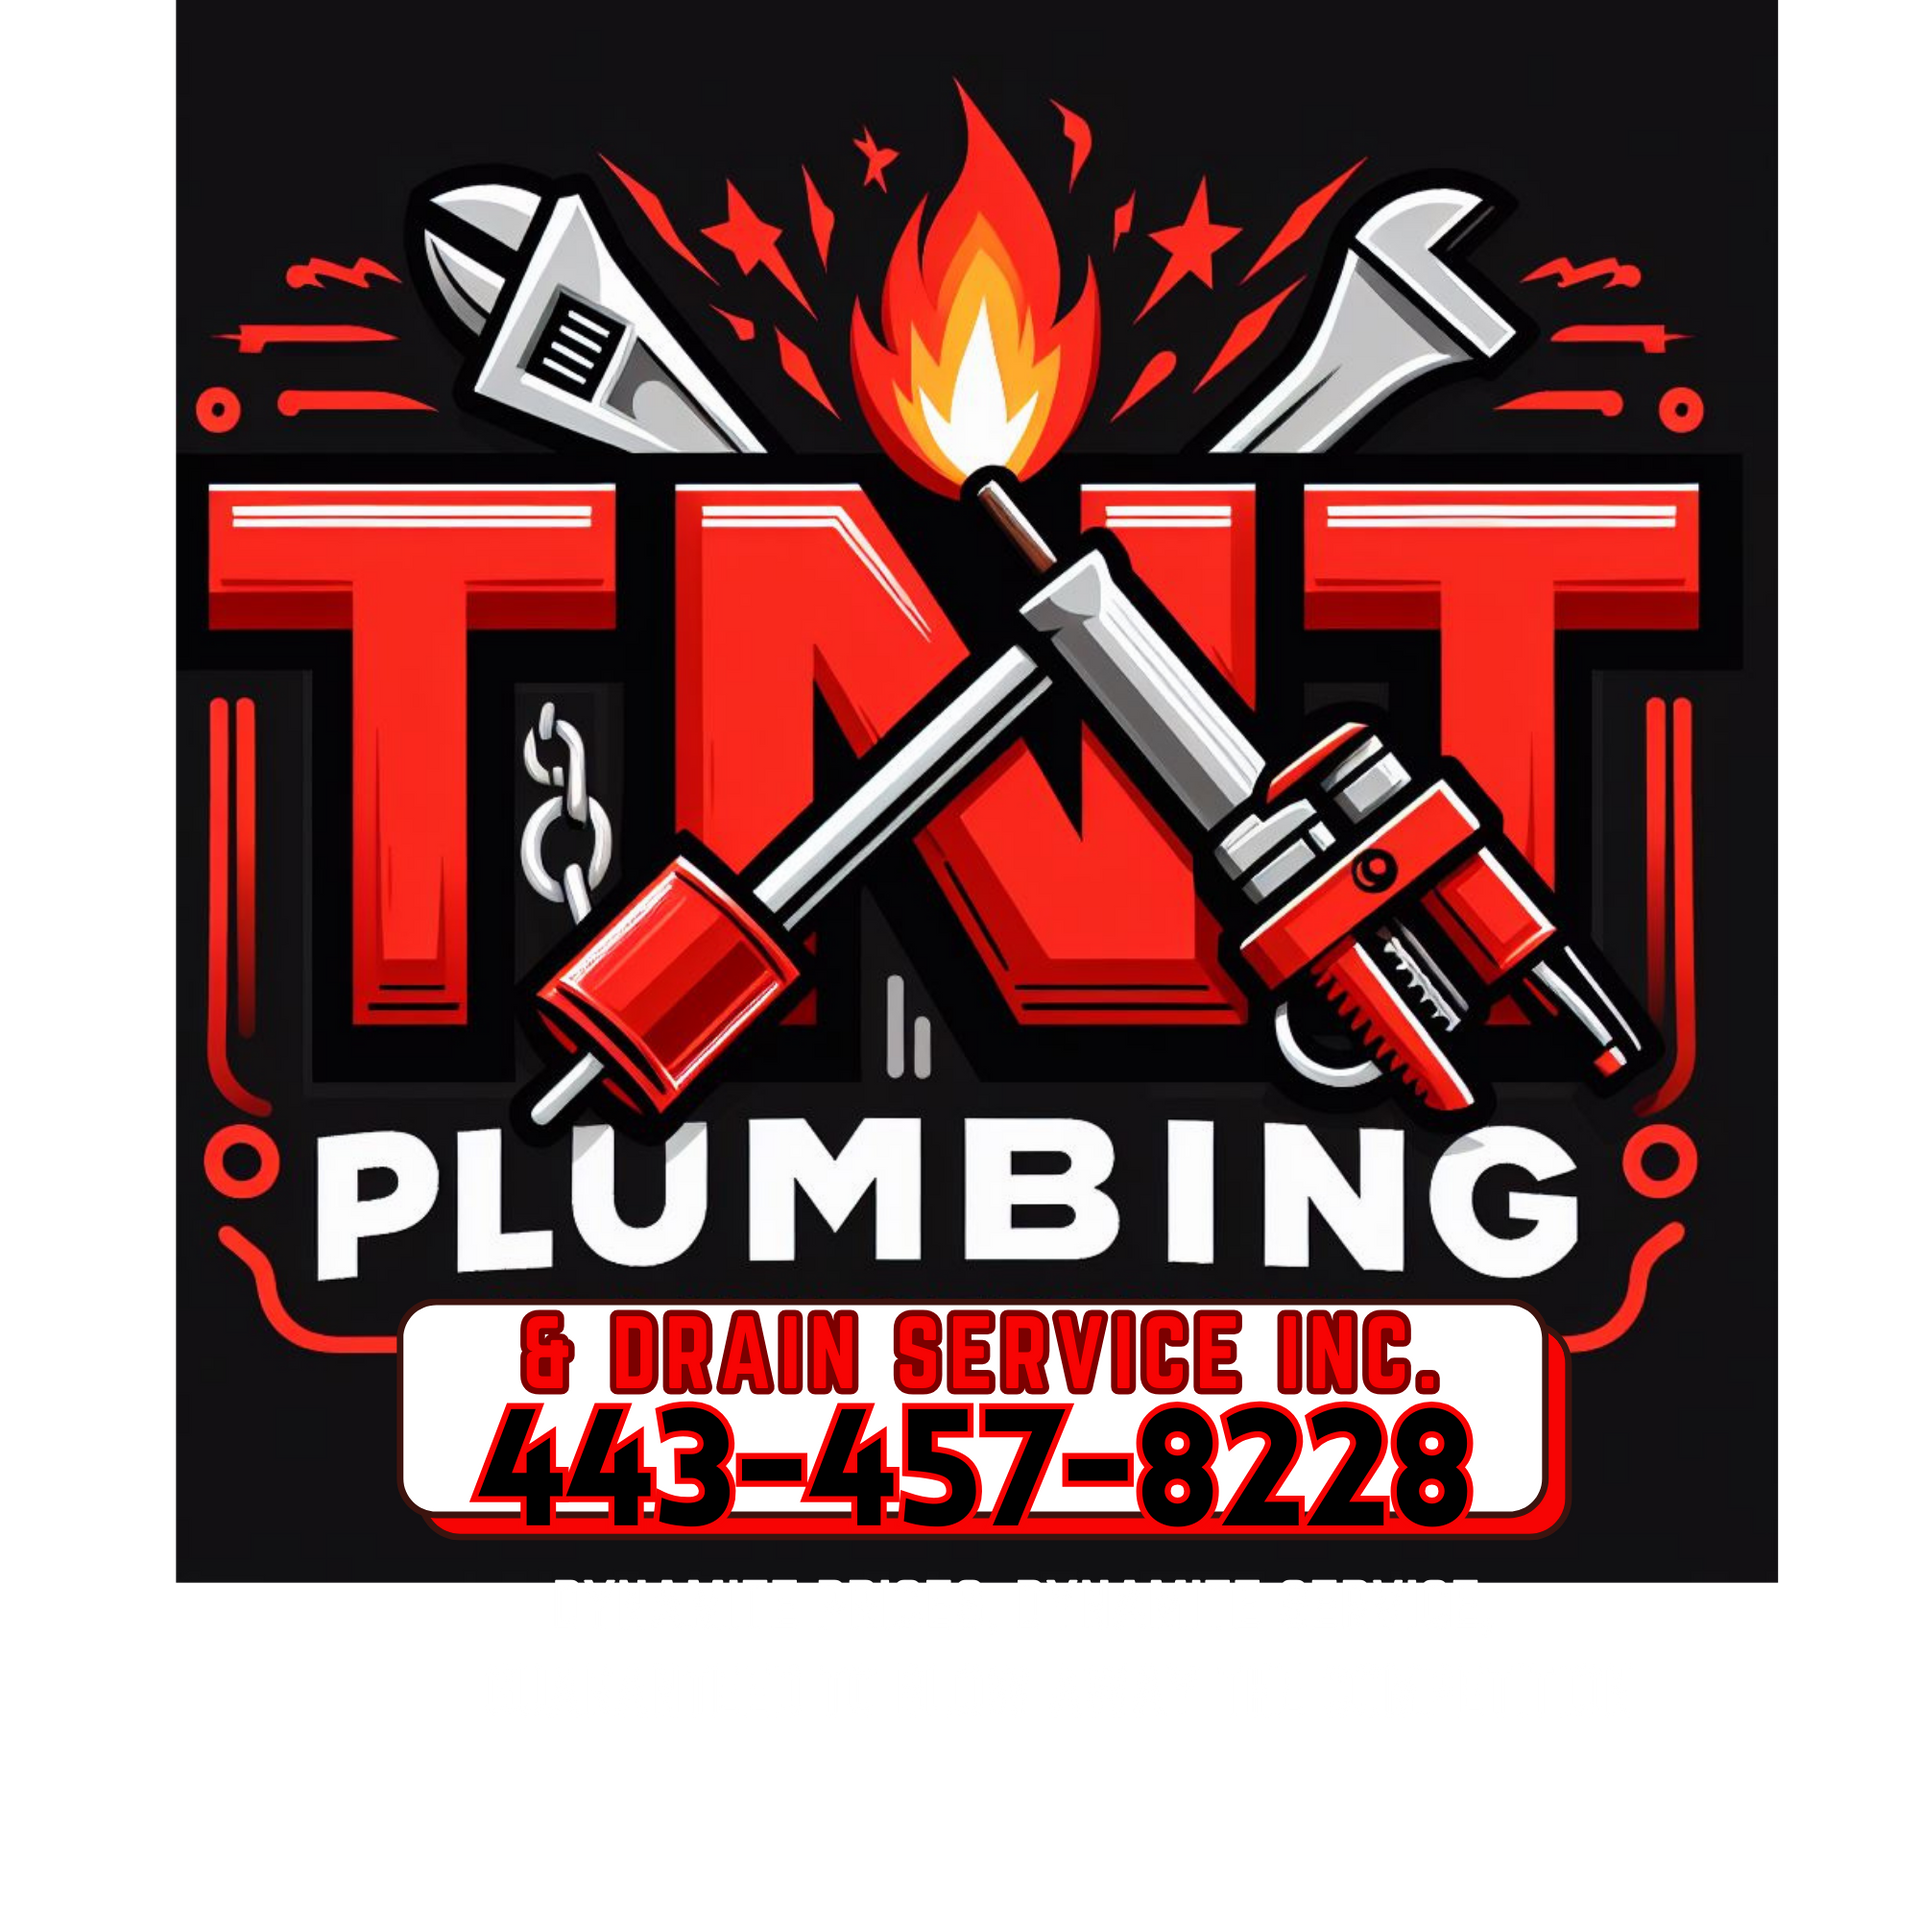 a logo for t & t plumbing and drain service inc.